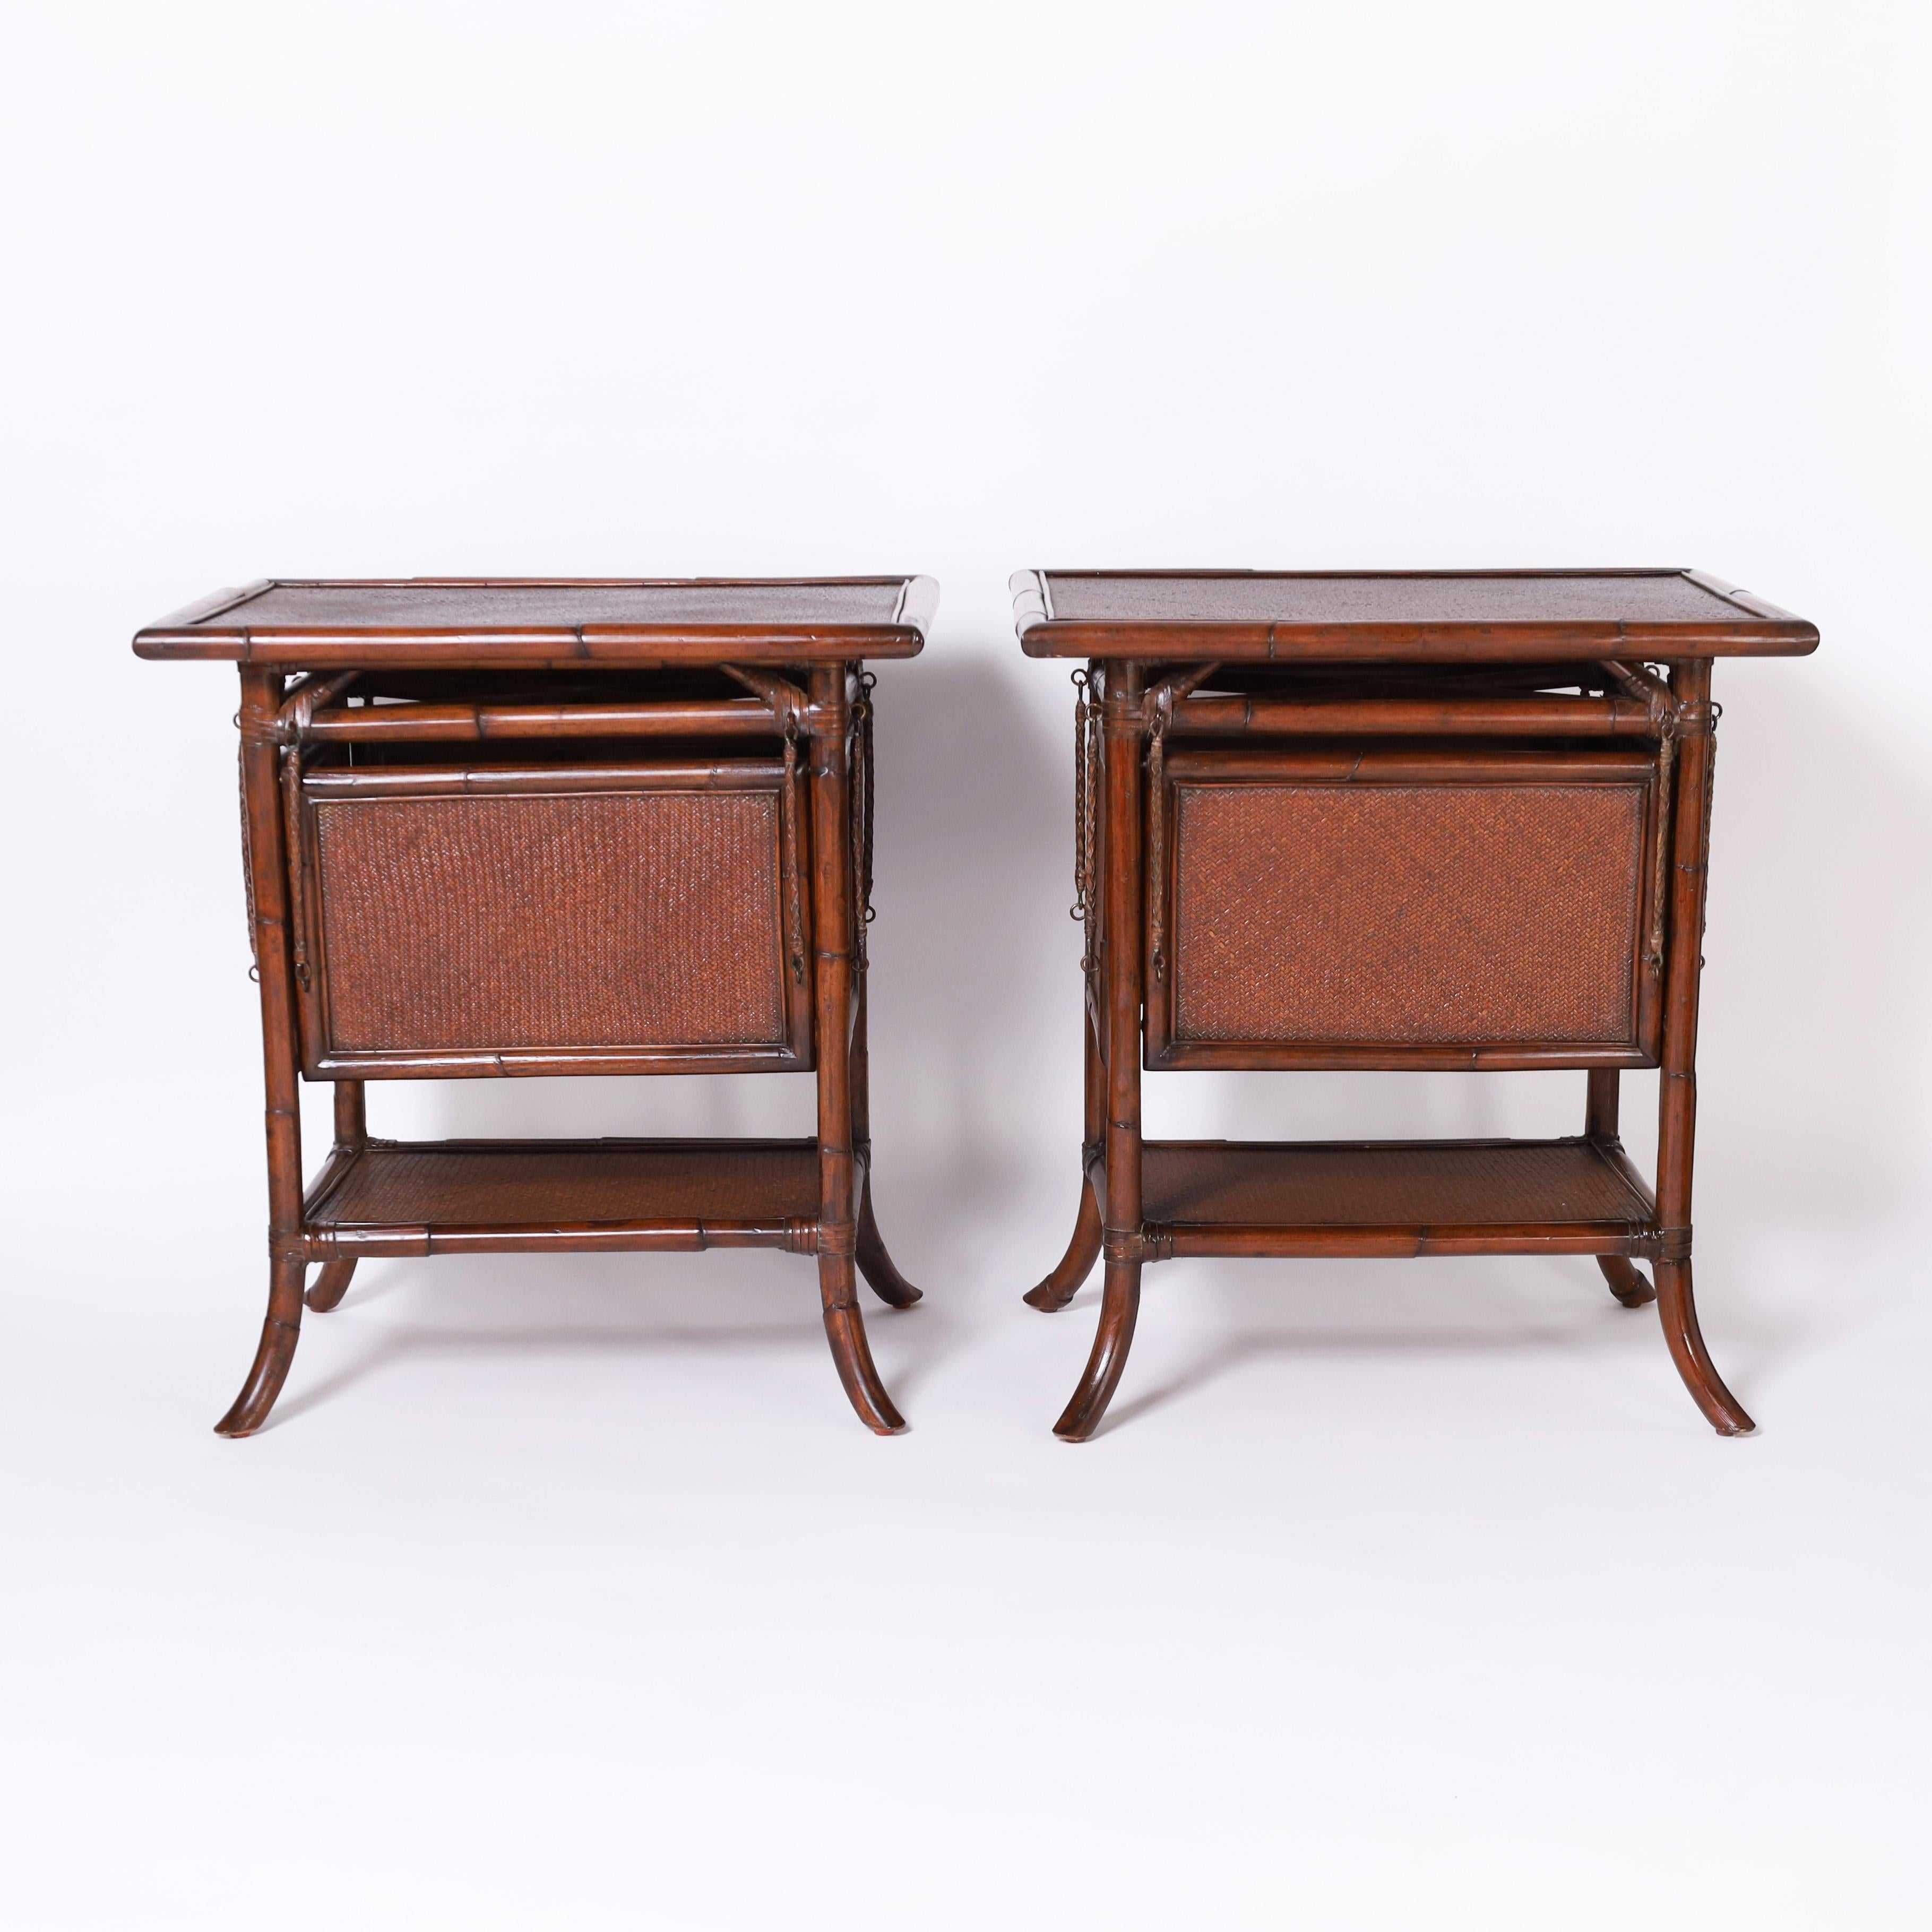 British Colonial Pair of Vintage Bamboo and Grasscloth Stands with Foldout Trays